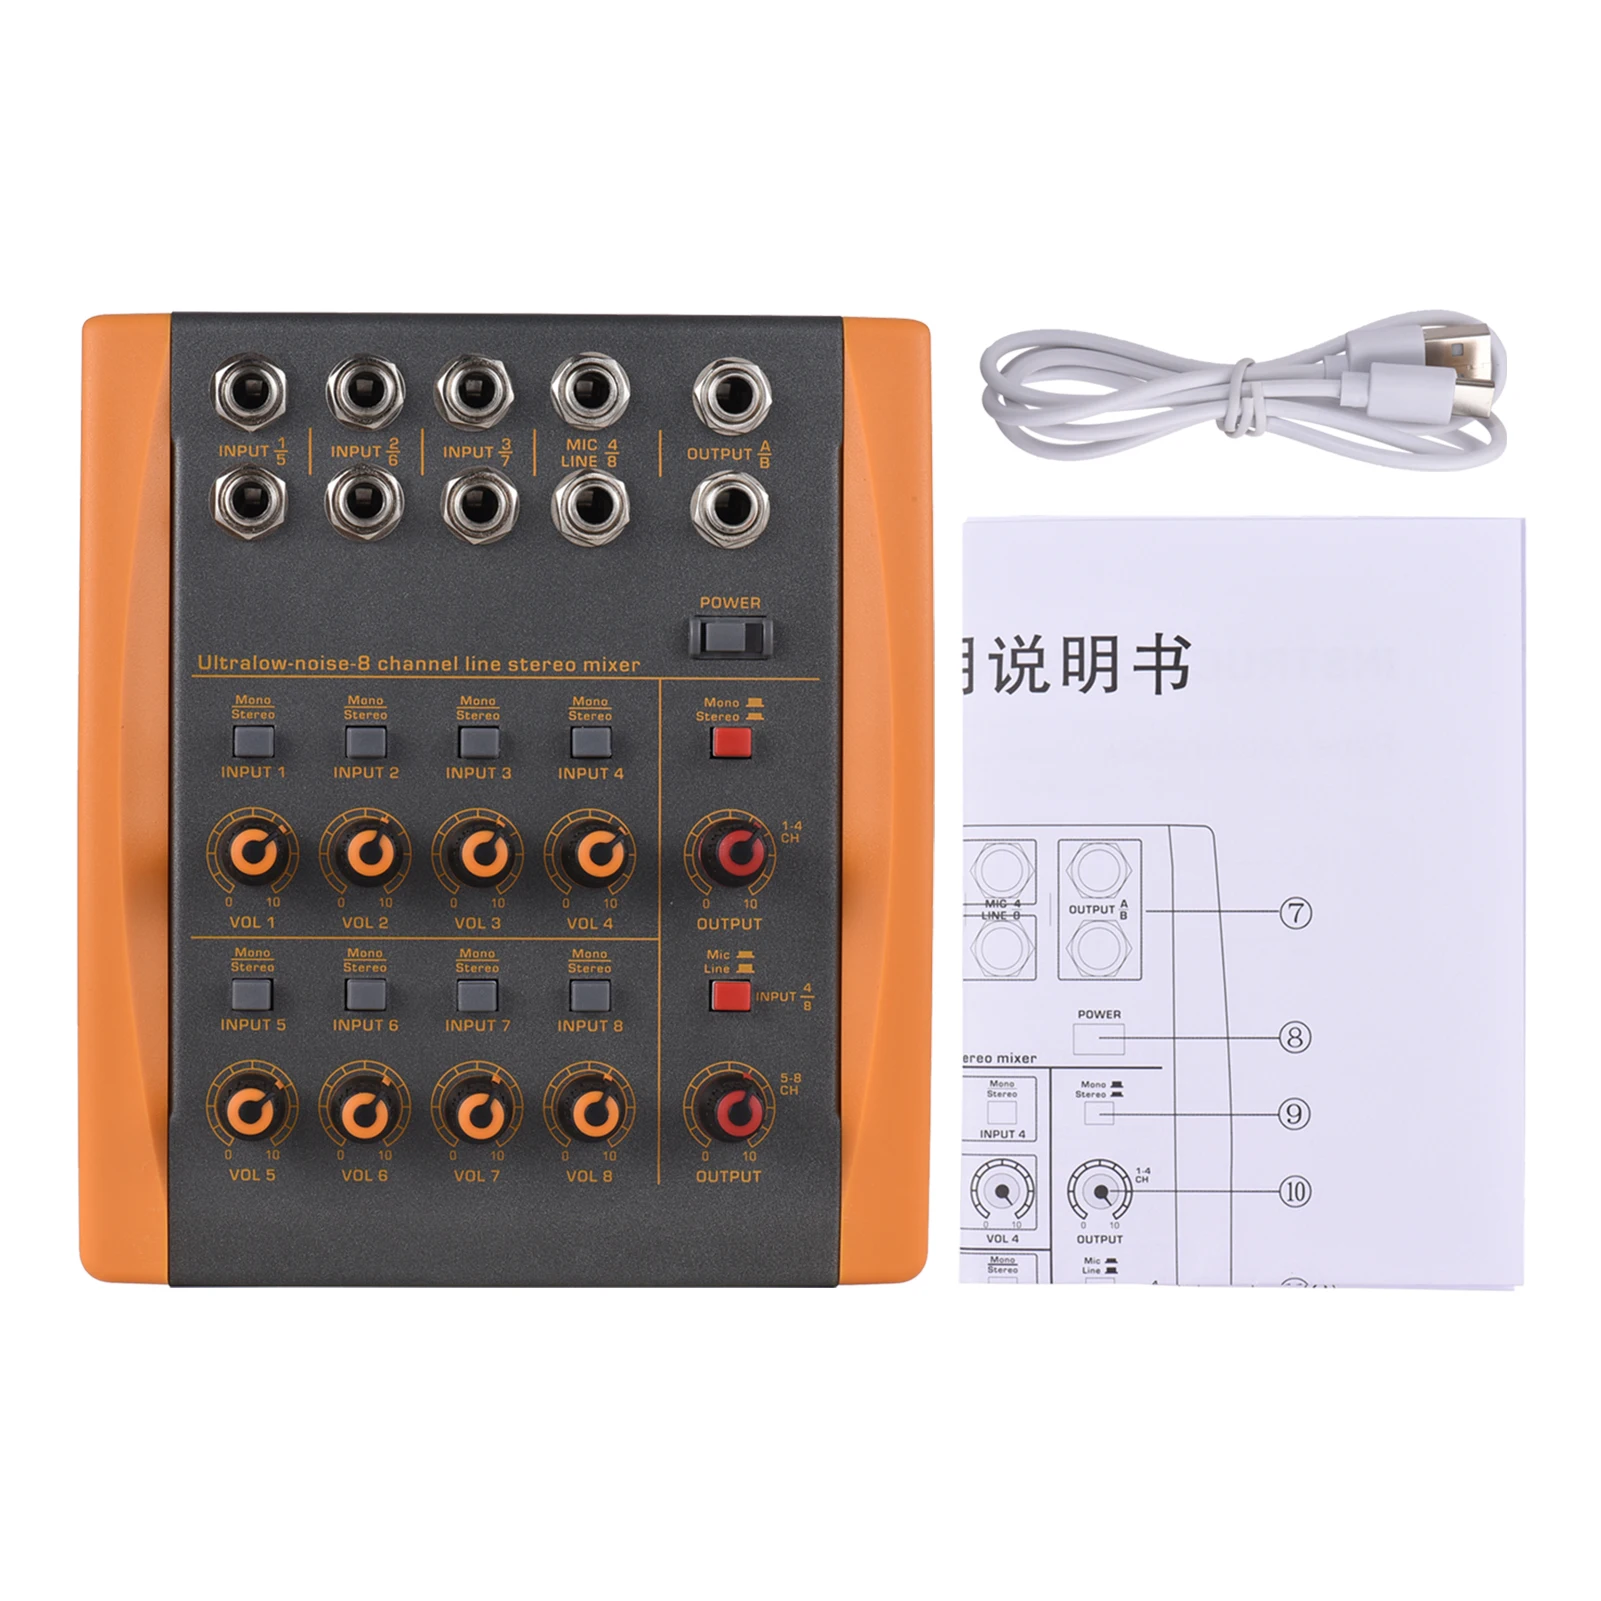 

8-Channel Mixing Console Ultra Low Noise 8 Channels Line Stereo Mixer Mono/Stereo Switching Compact Digital Audio Mixer